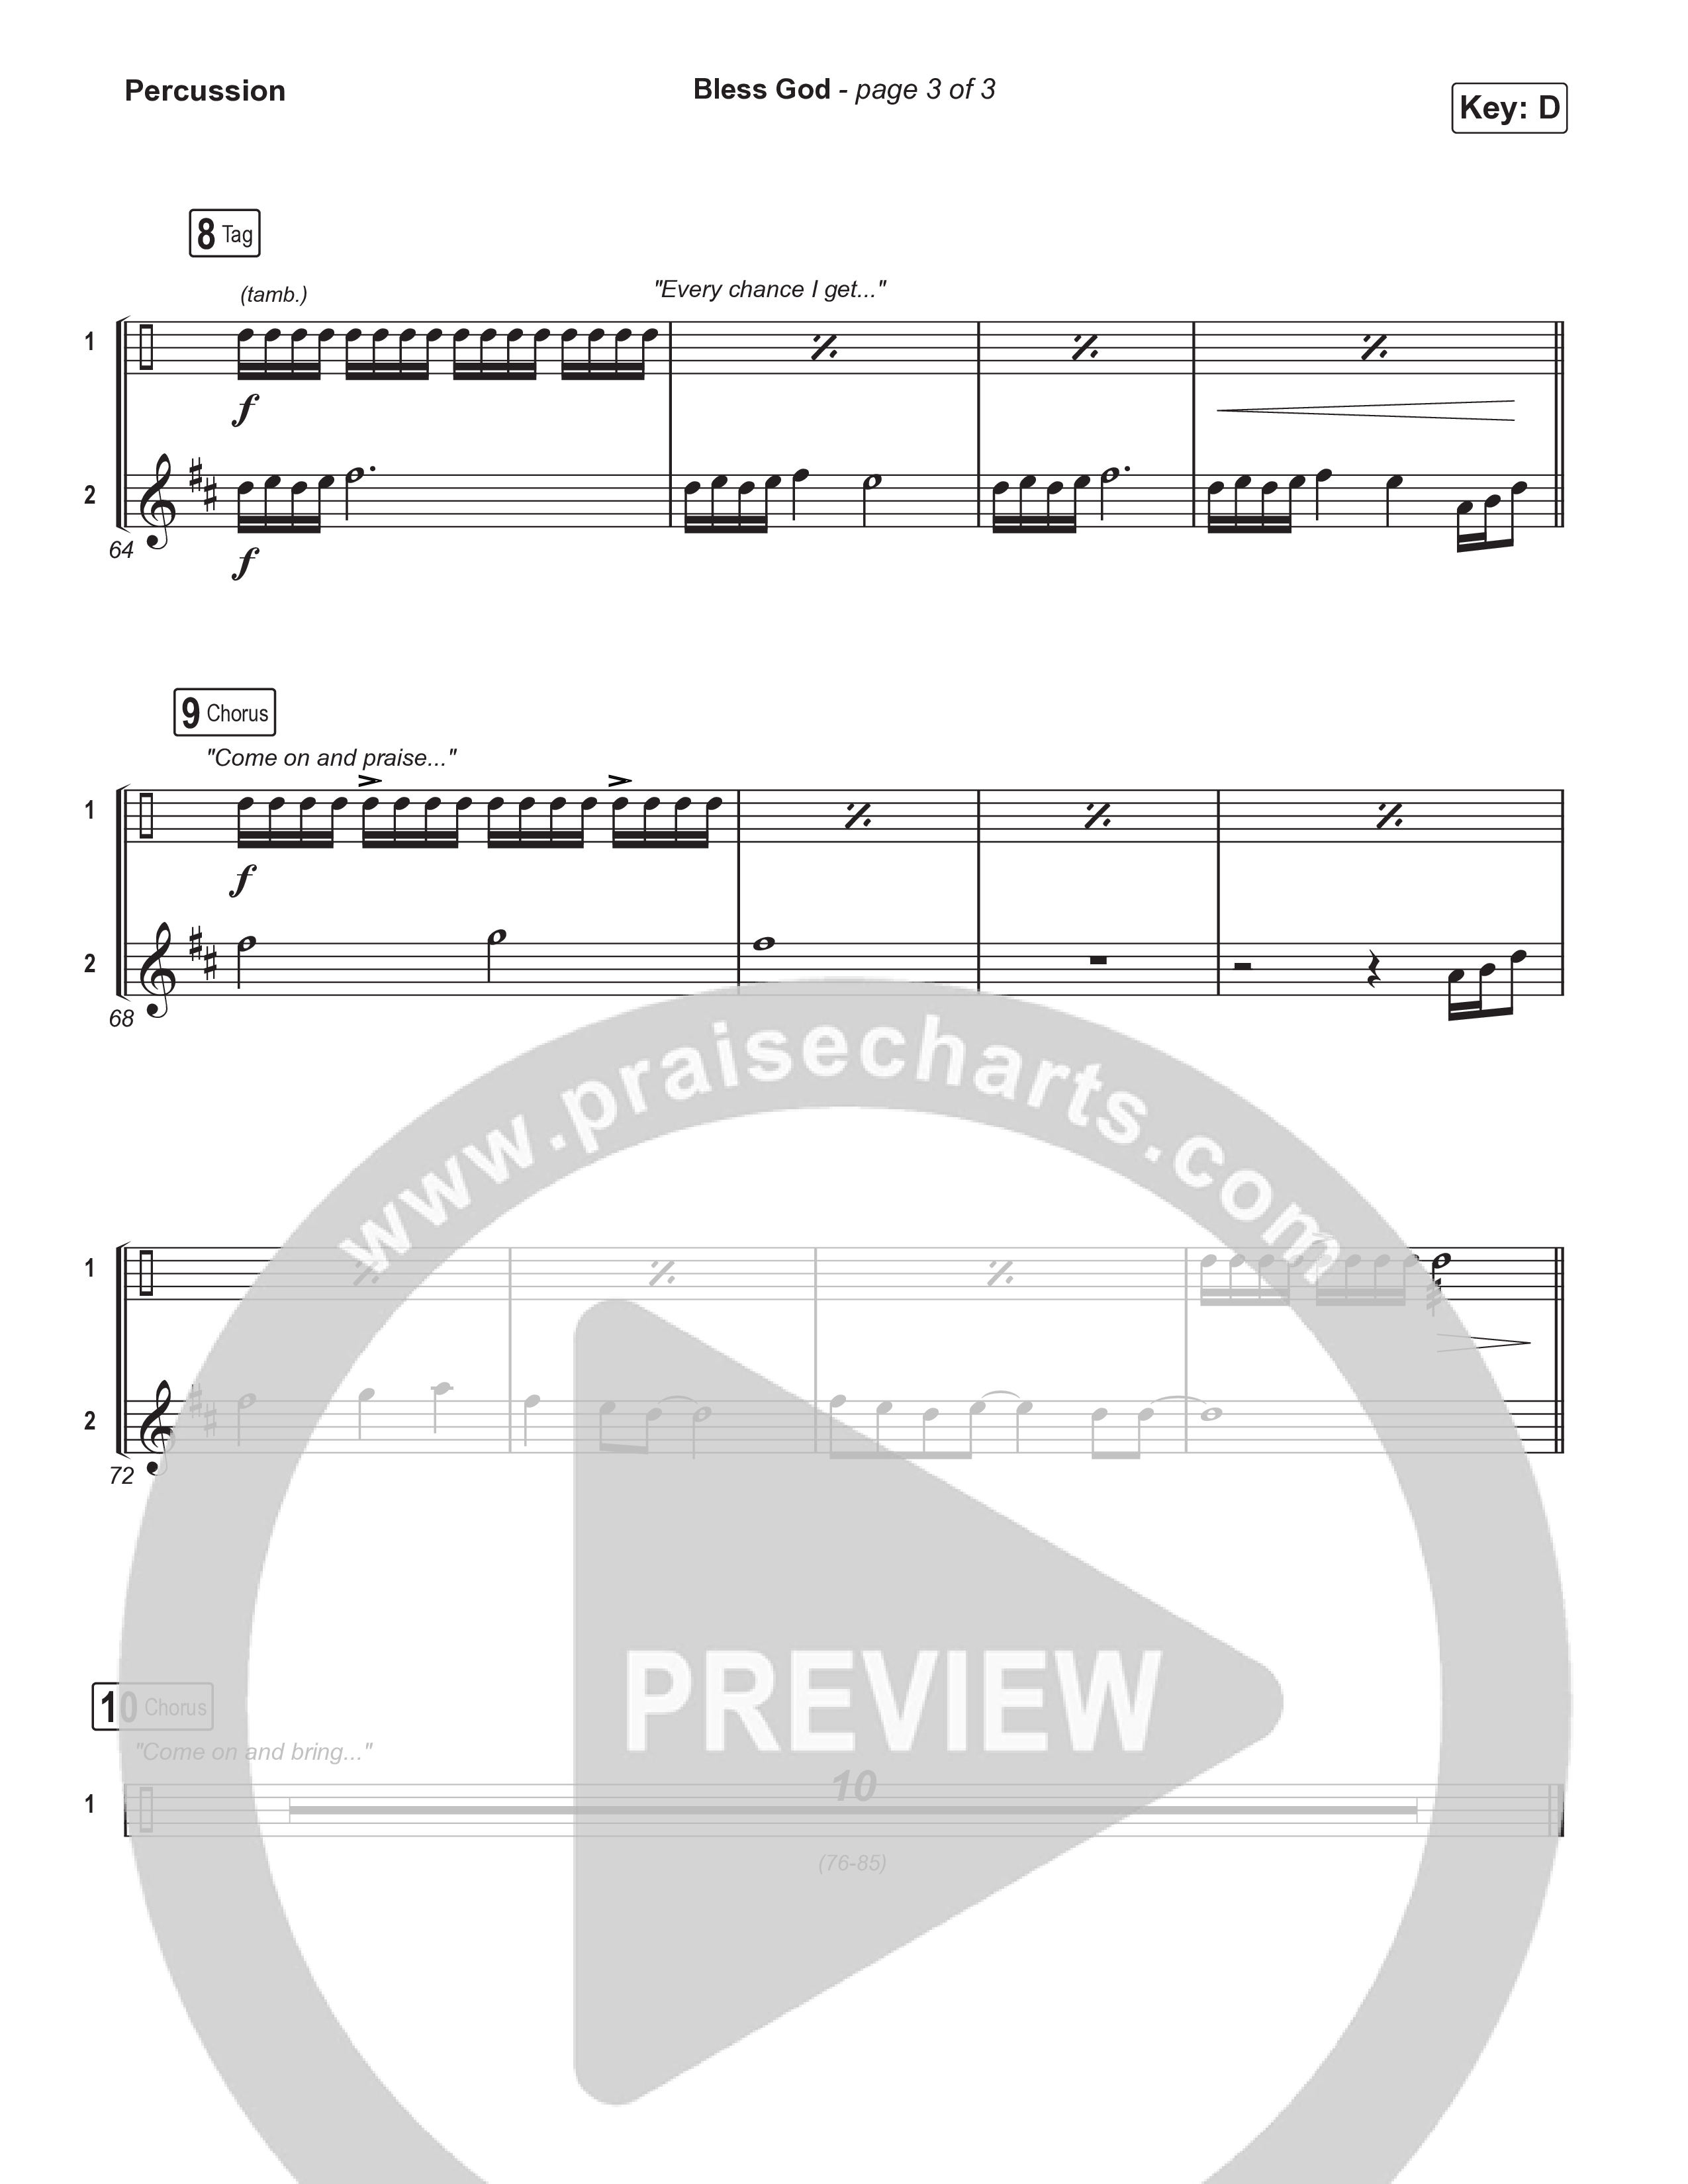 Bless God (Choral Anthem SATB) Percussion (Brooke Ligertwood / Arr. Luke Gambill)